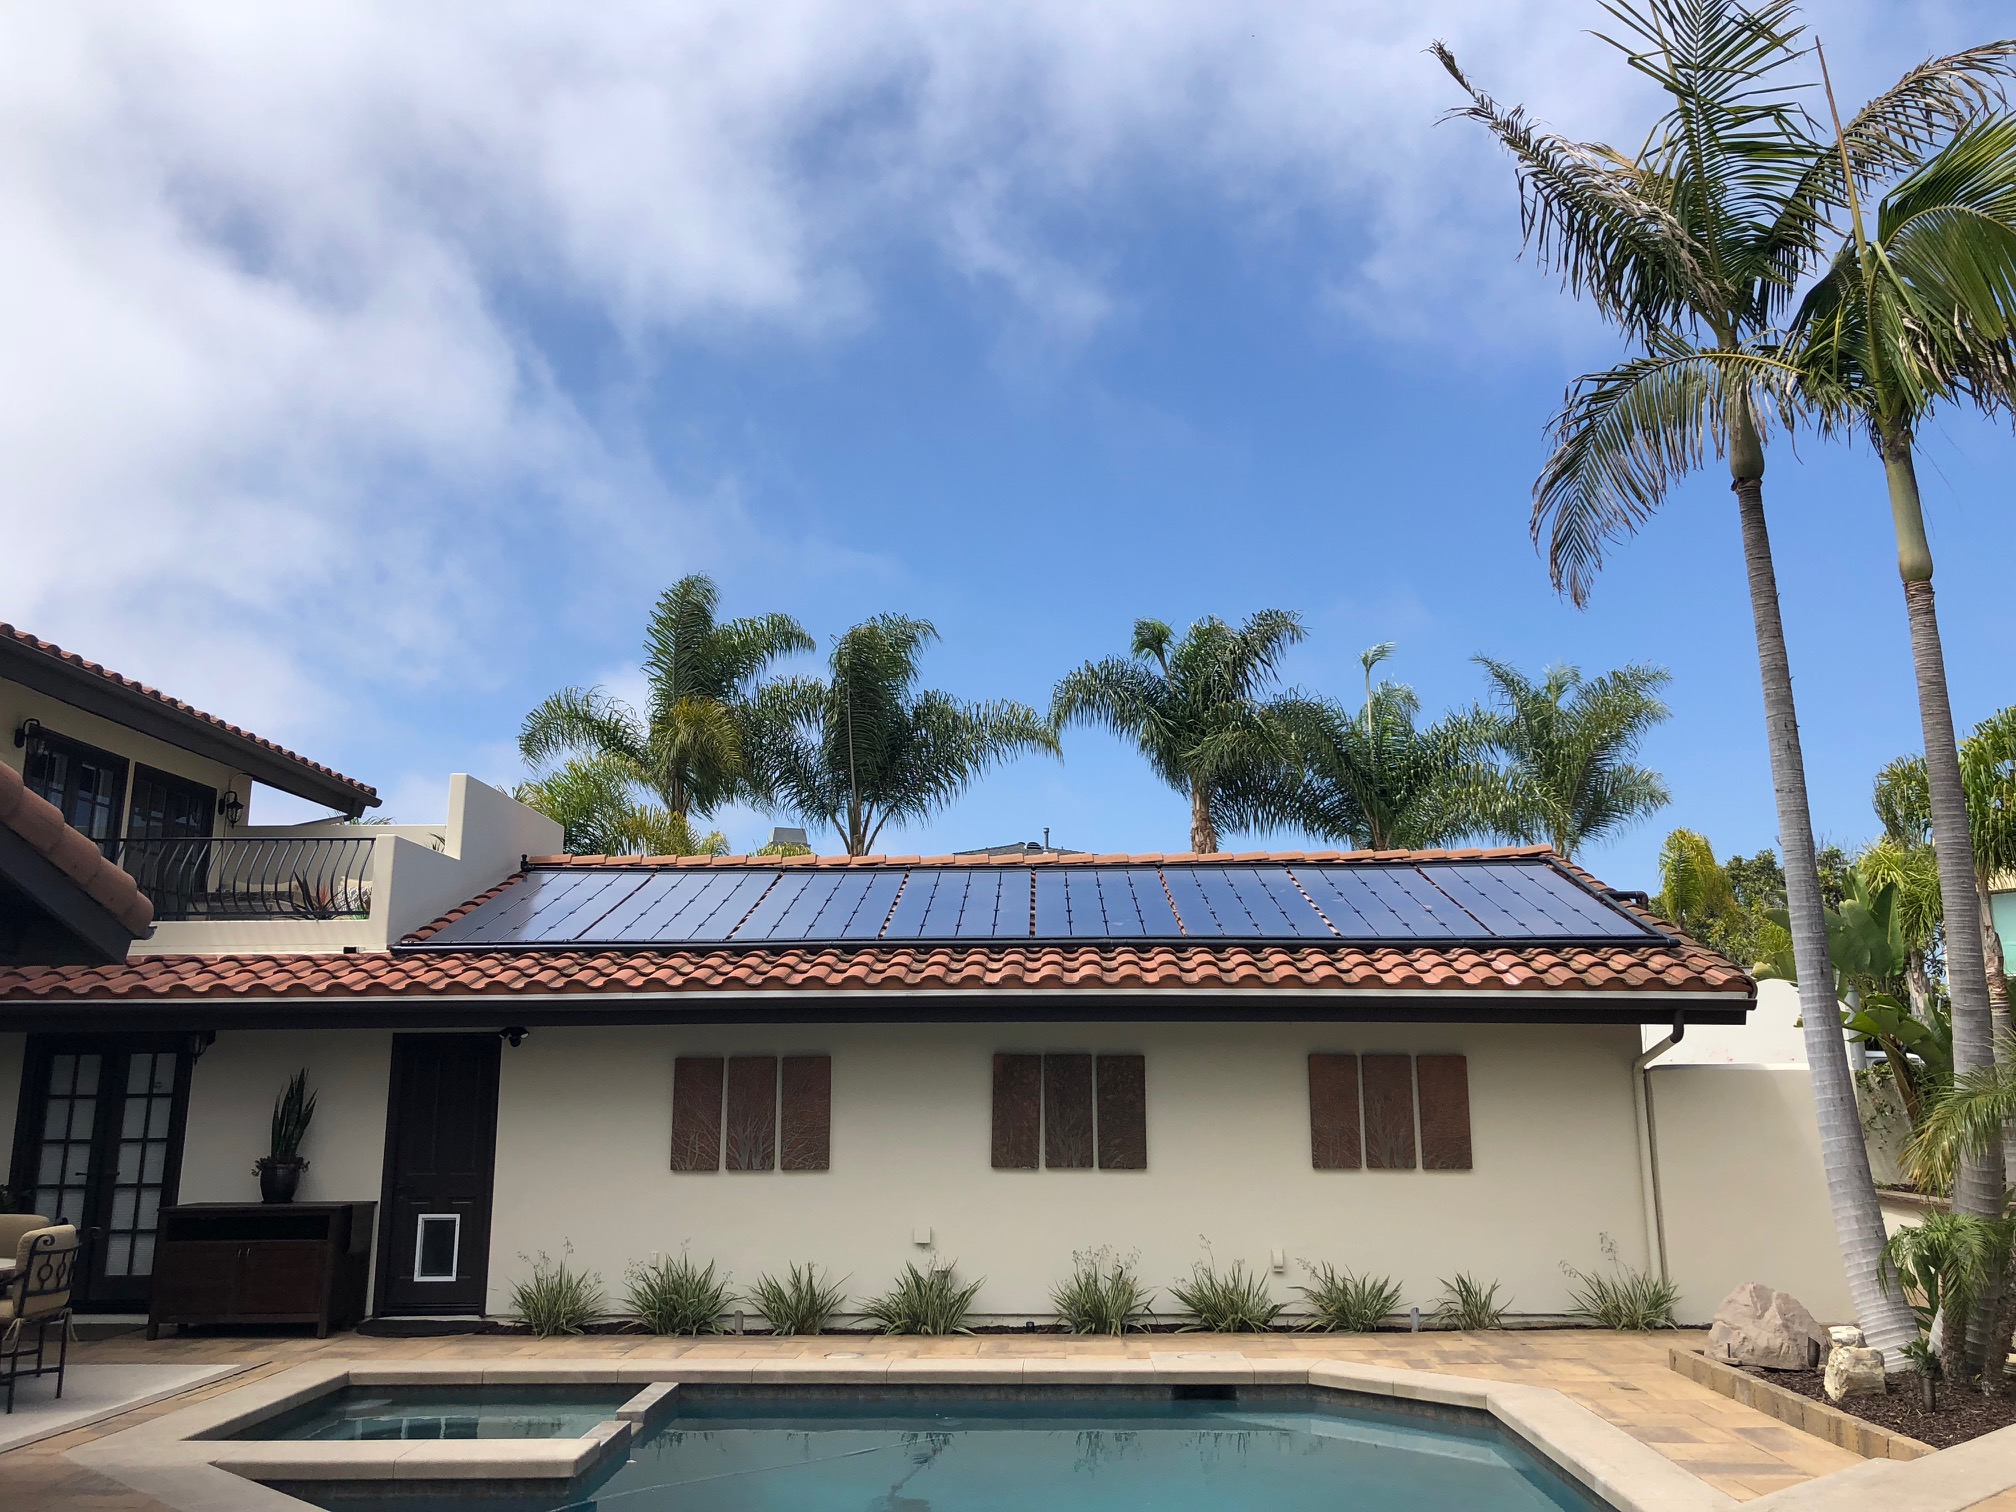 How Does a Solar Pool Heater Actually Work? 1